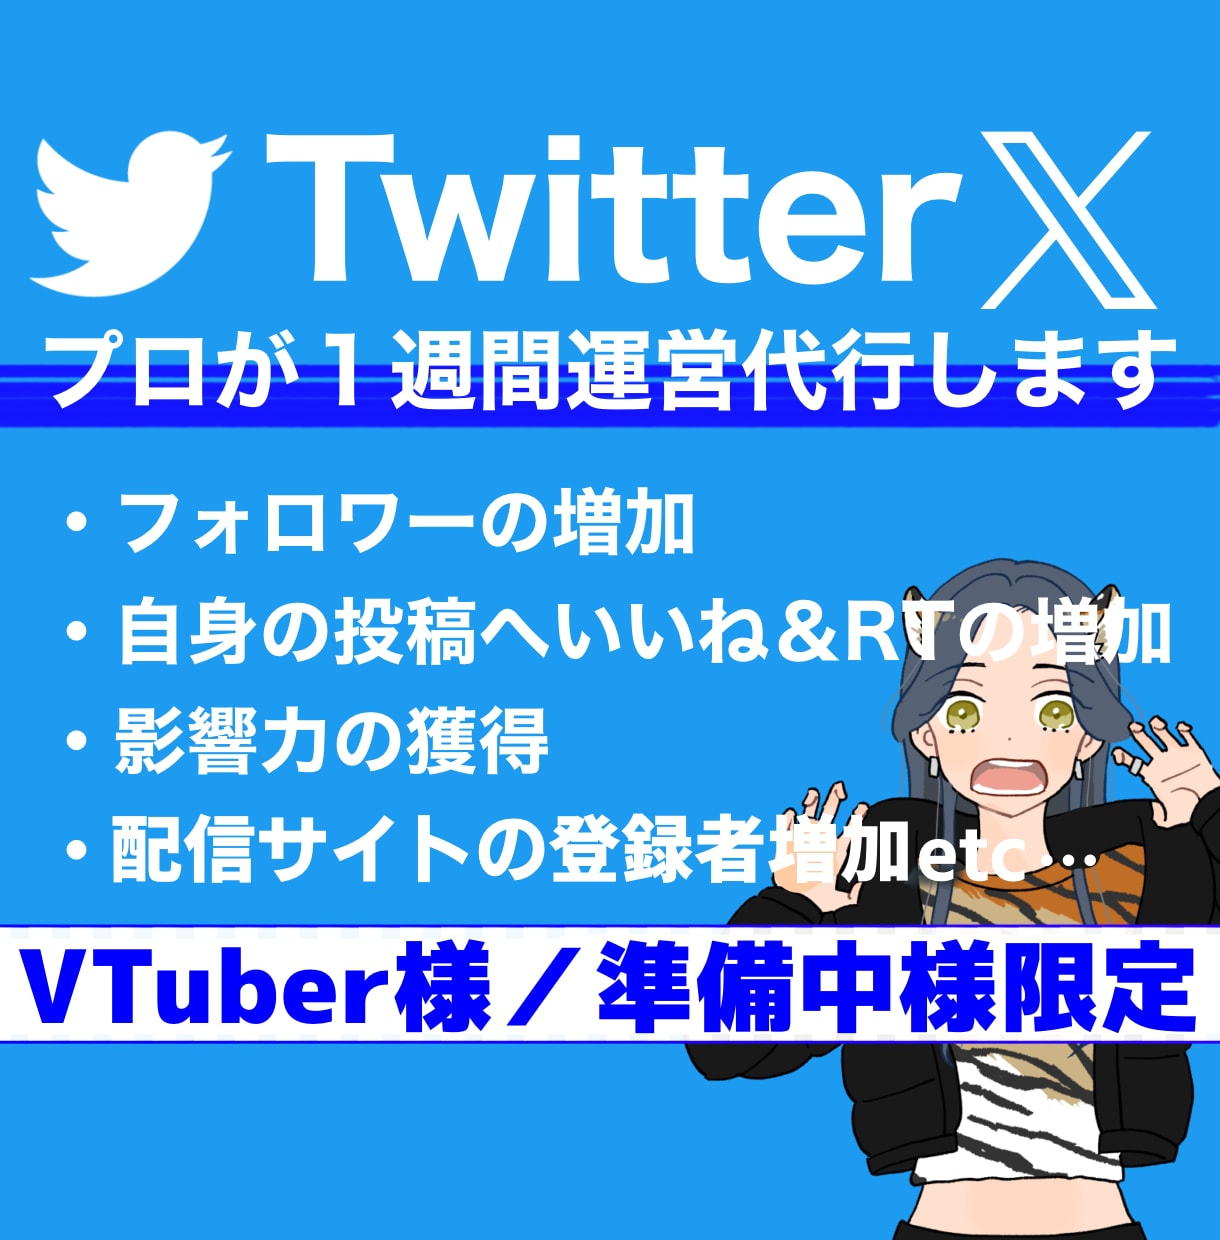 💬Coconala｜VTuber only! Professionals operate Twitter Kaito, a consultant specializing in SNS…